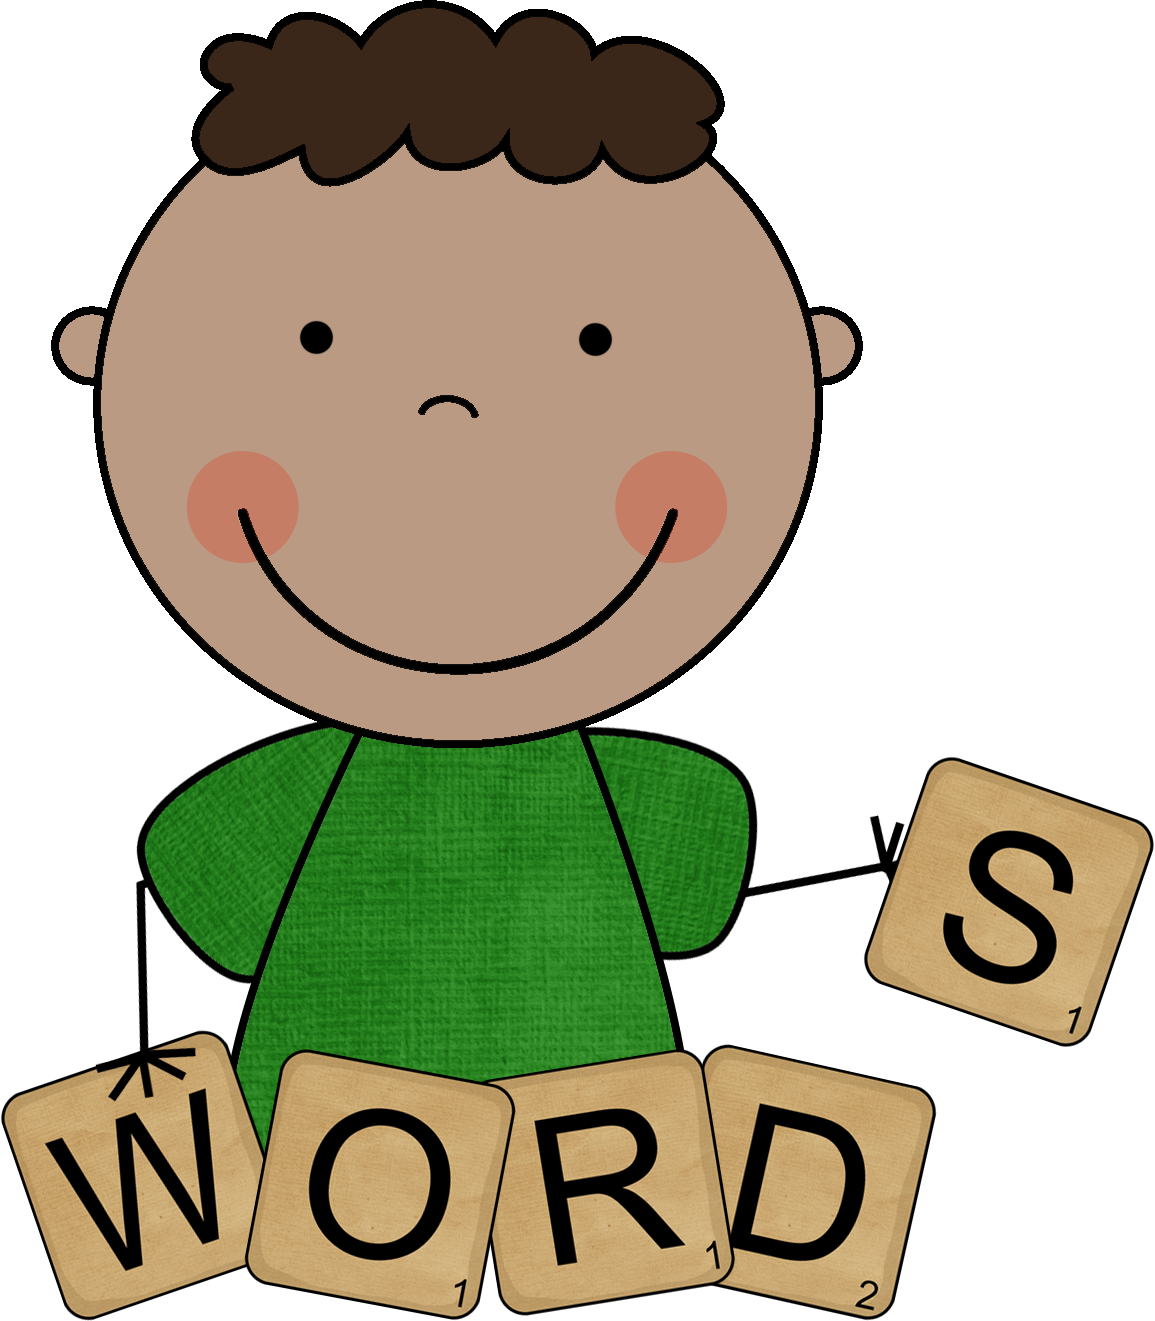 Vocabulary drawing at getdrawings. Evidence clipart word